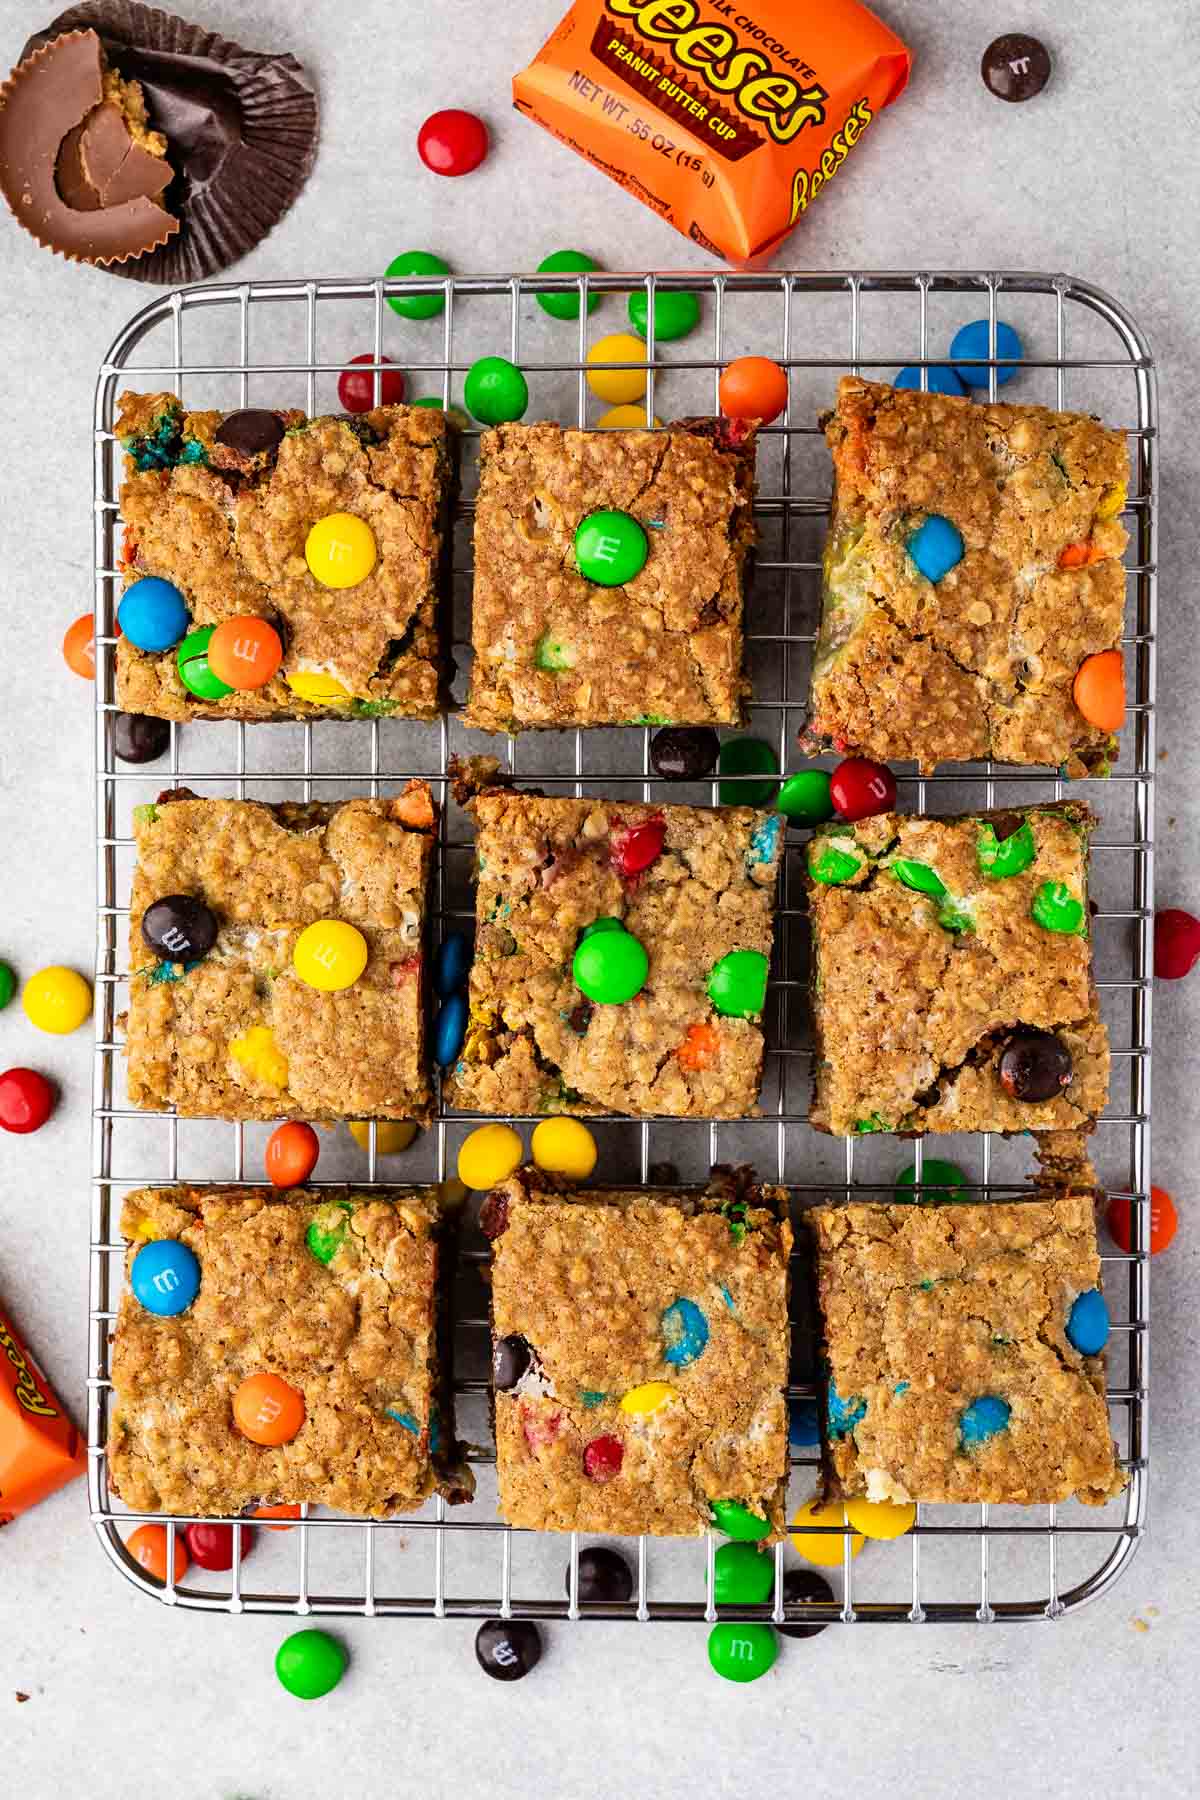 laid out gooey bars with M&Ms baked in